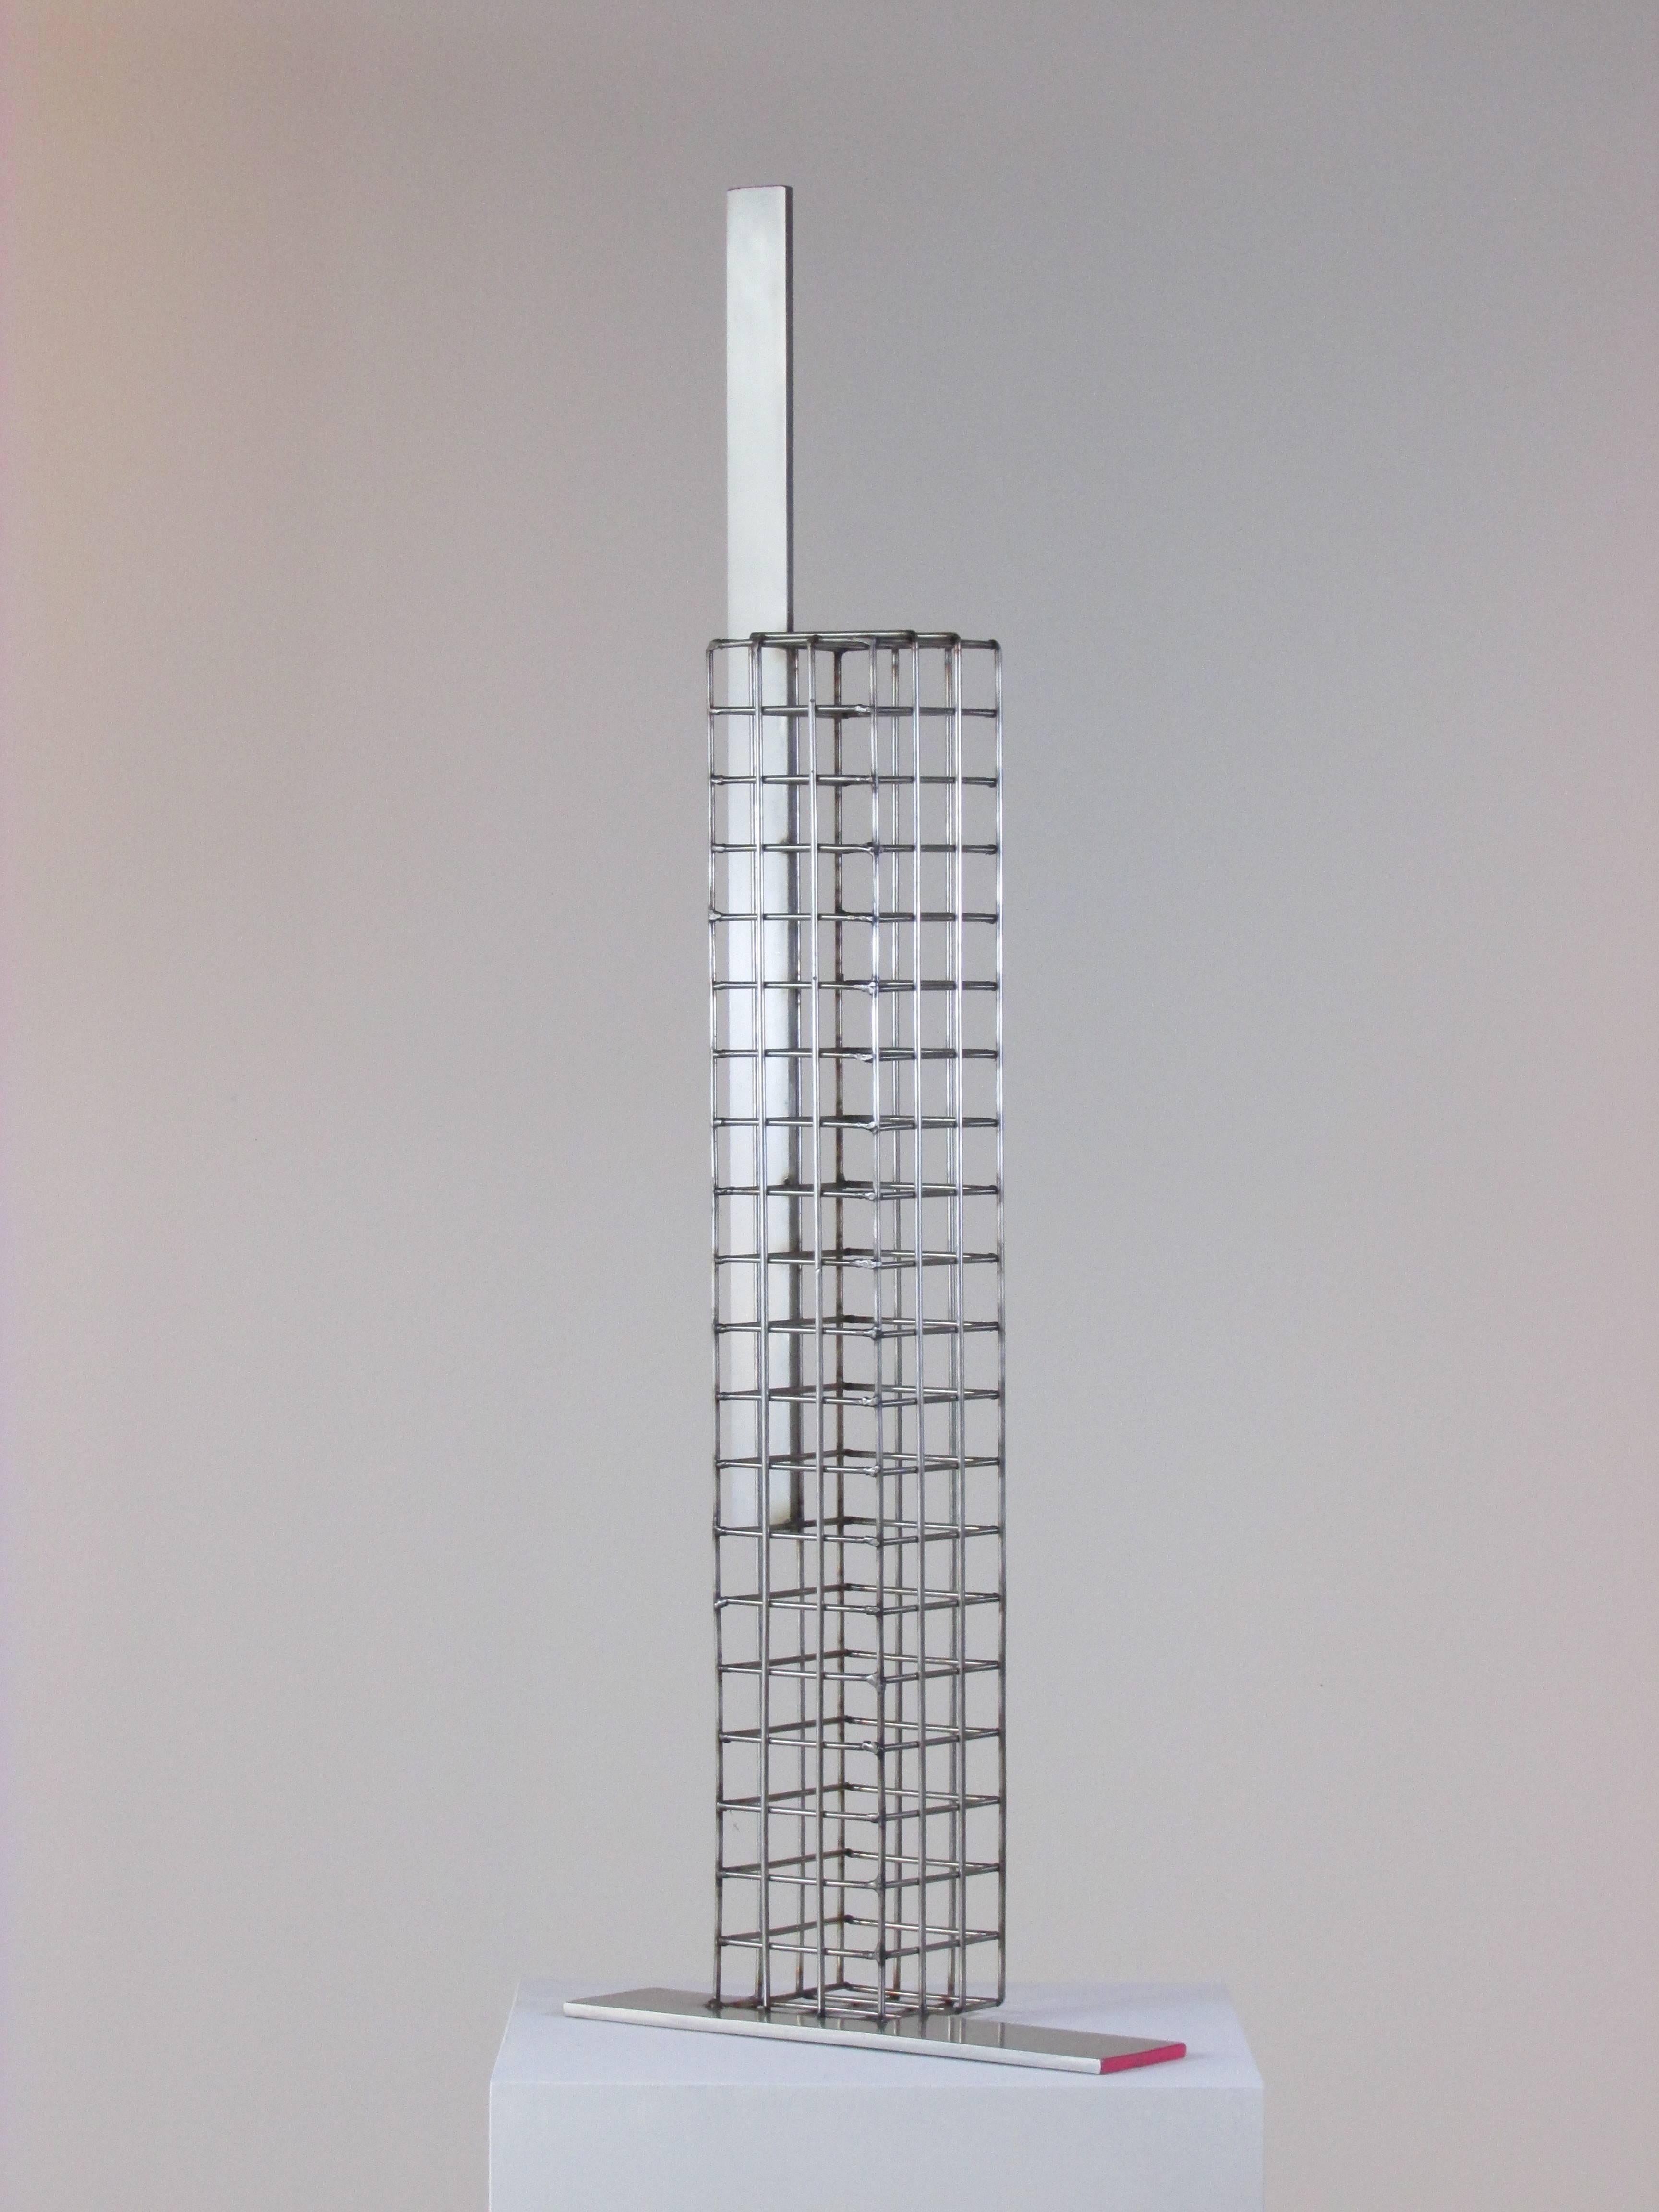 Edwin Salmon Abstract Sculpture - "304 Stainless Flat Erect" - Abstract Stainless Steel Sculpture